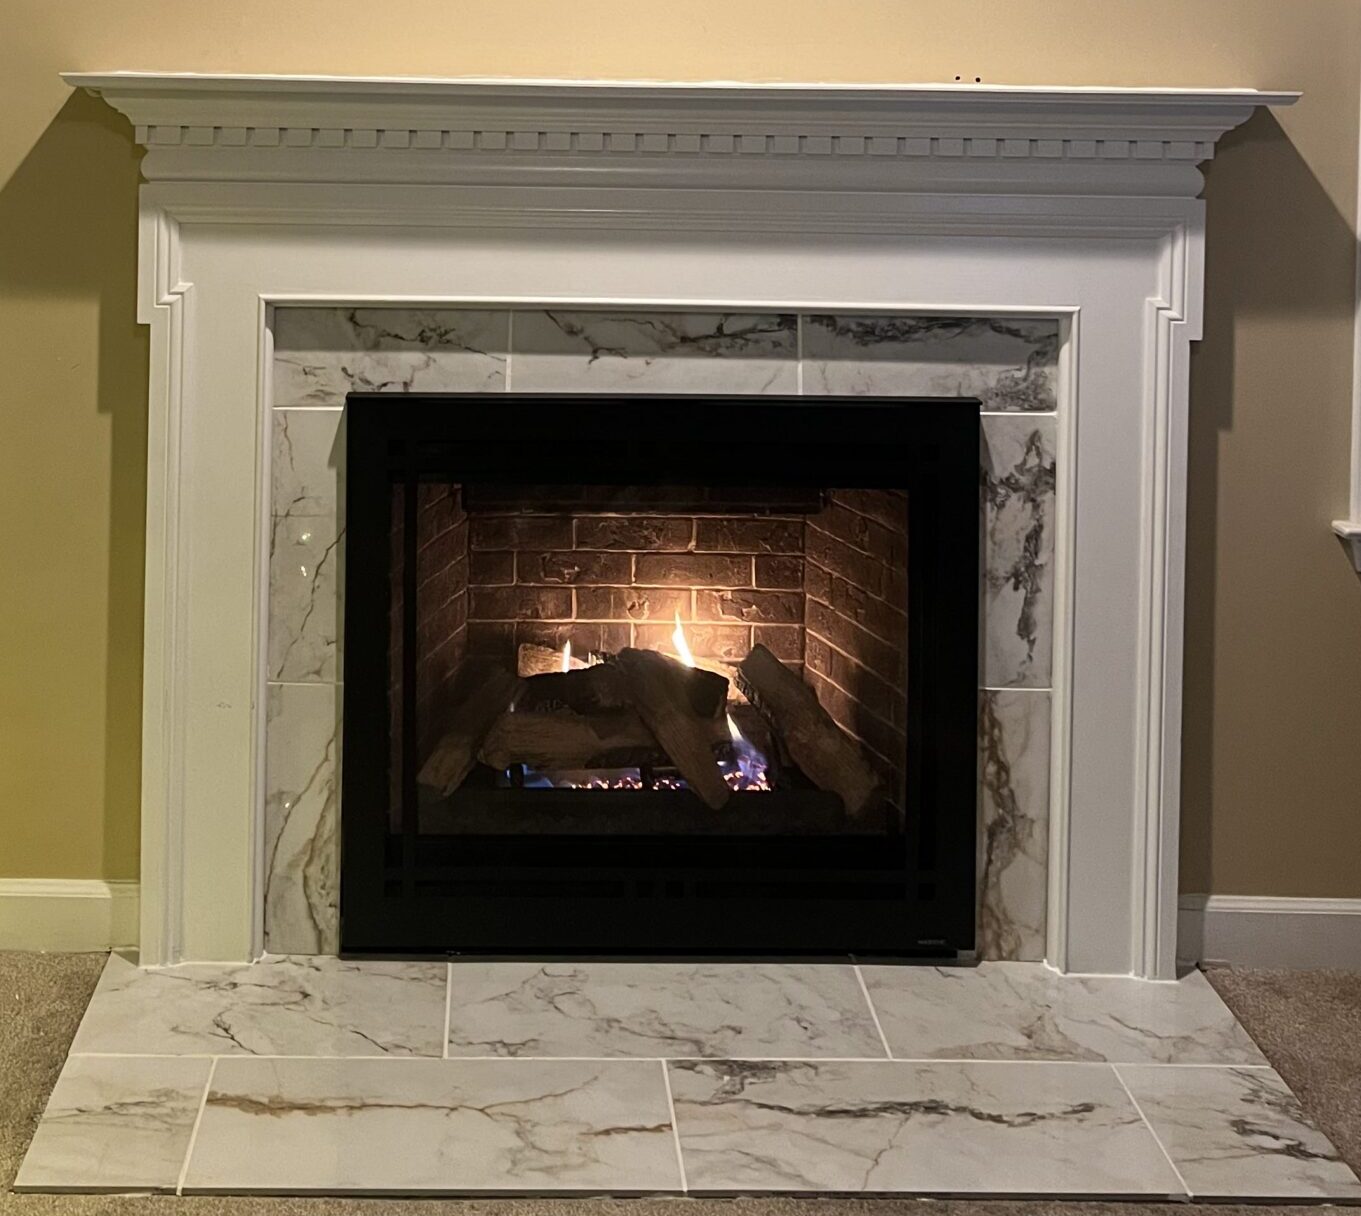 Vented gas fireplace set in a marble designed fireplace